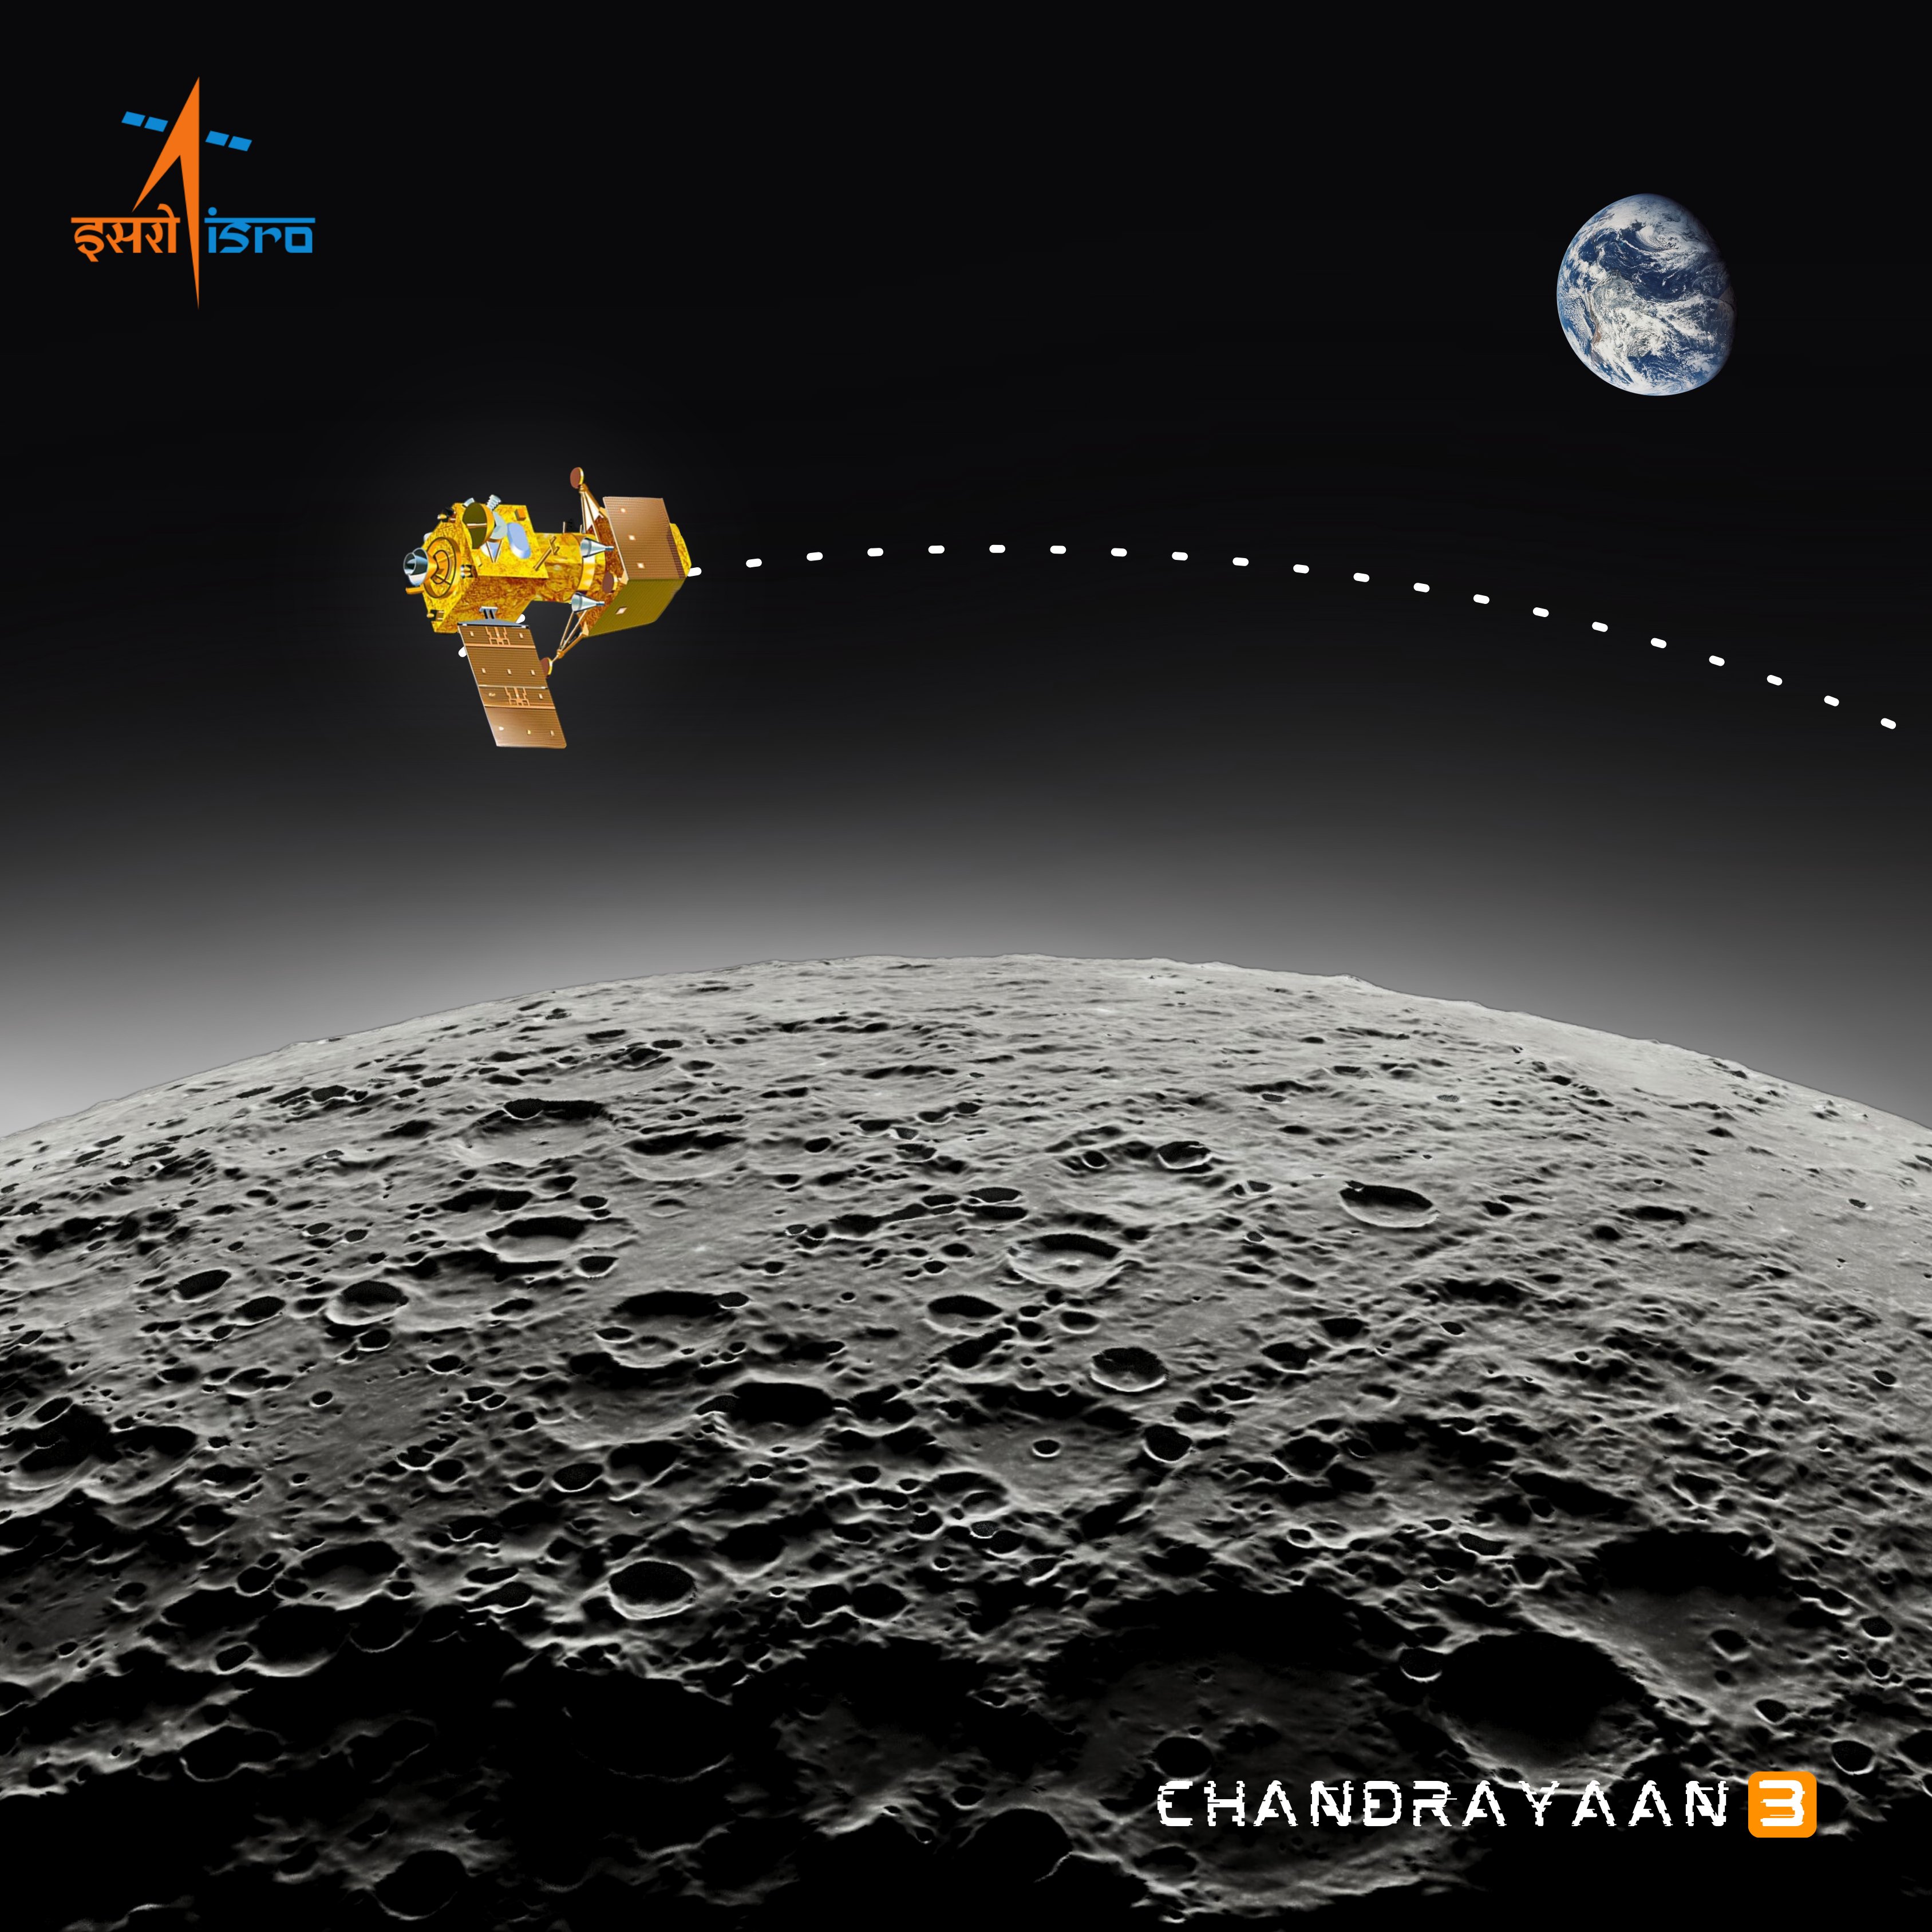 Chandrayaan-3: ISRO releases images of Lunar far side area captured by Lander camera